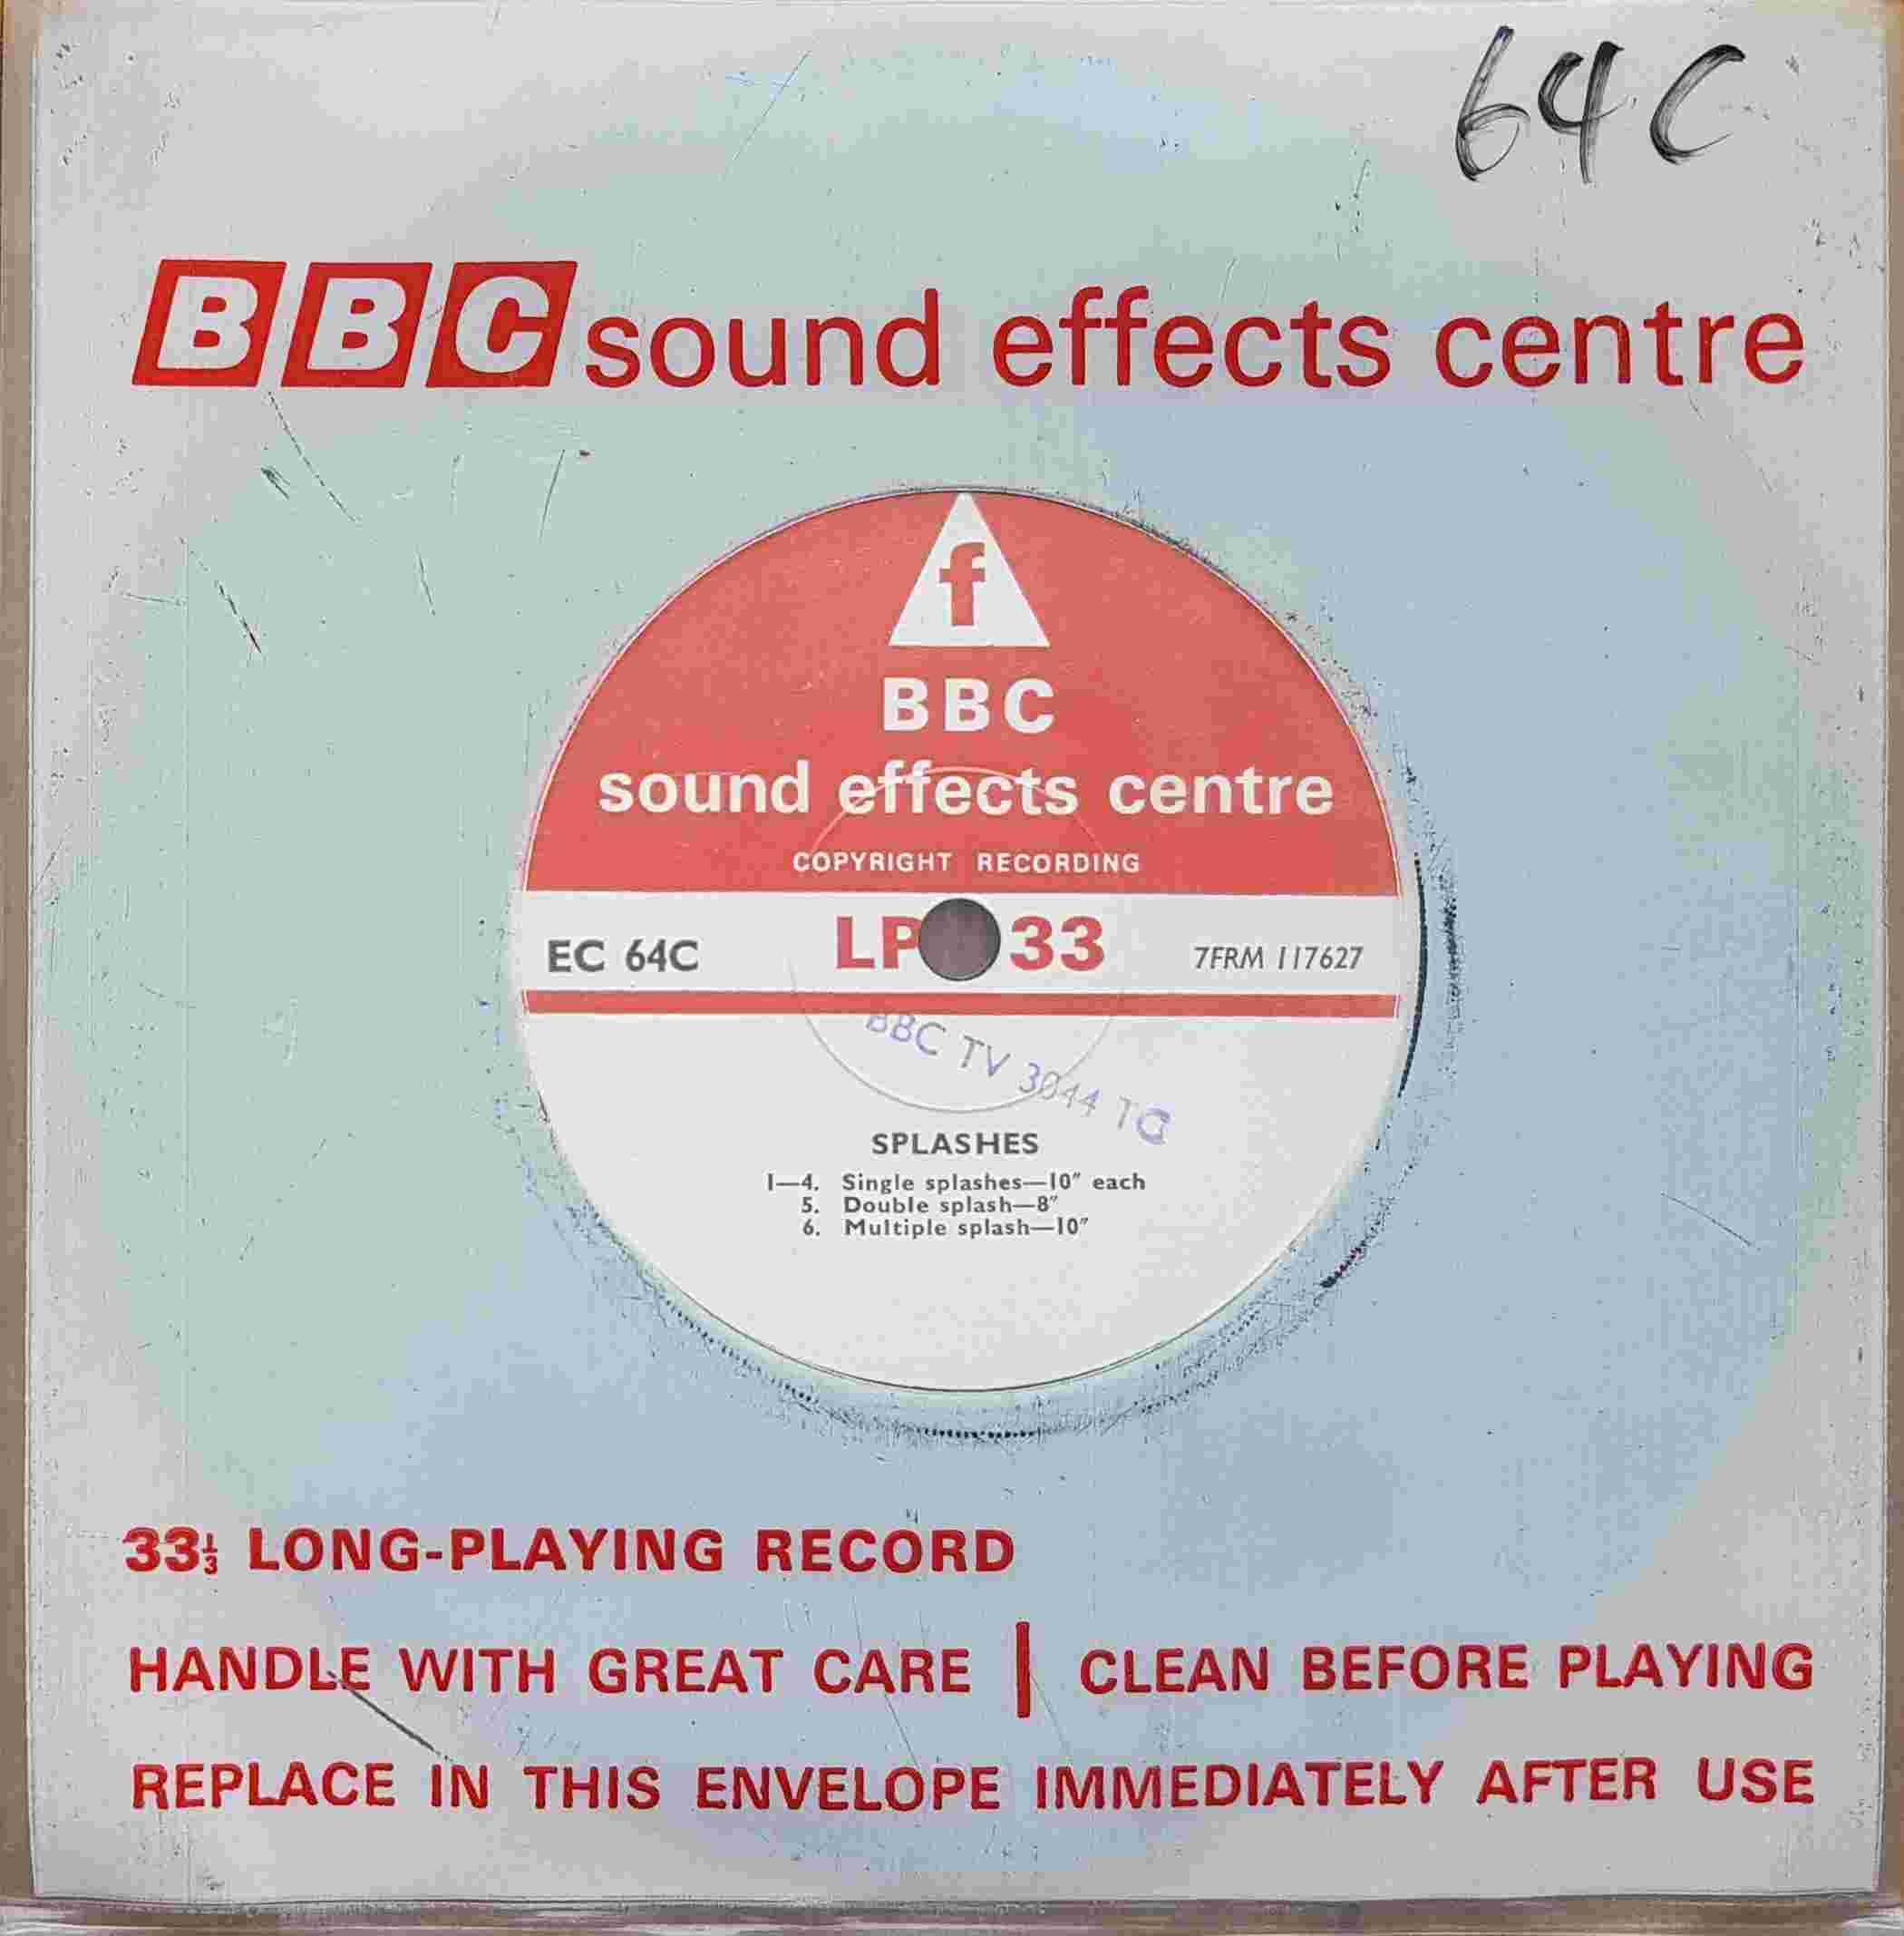 Picture of EC 64C Swimming pool by artist Not registered from the BBC singles - Records and Tapes library